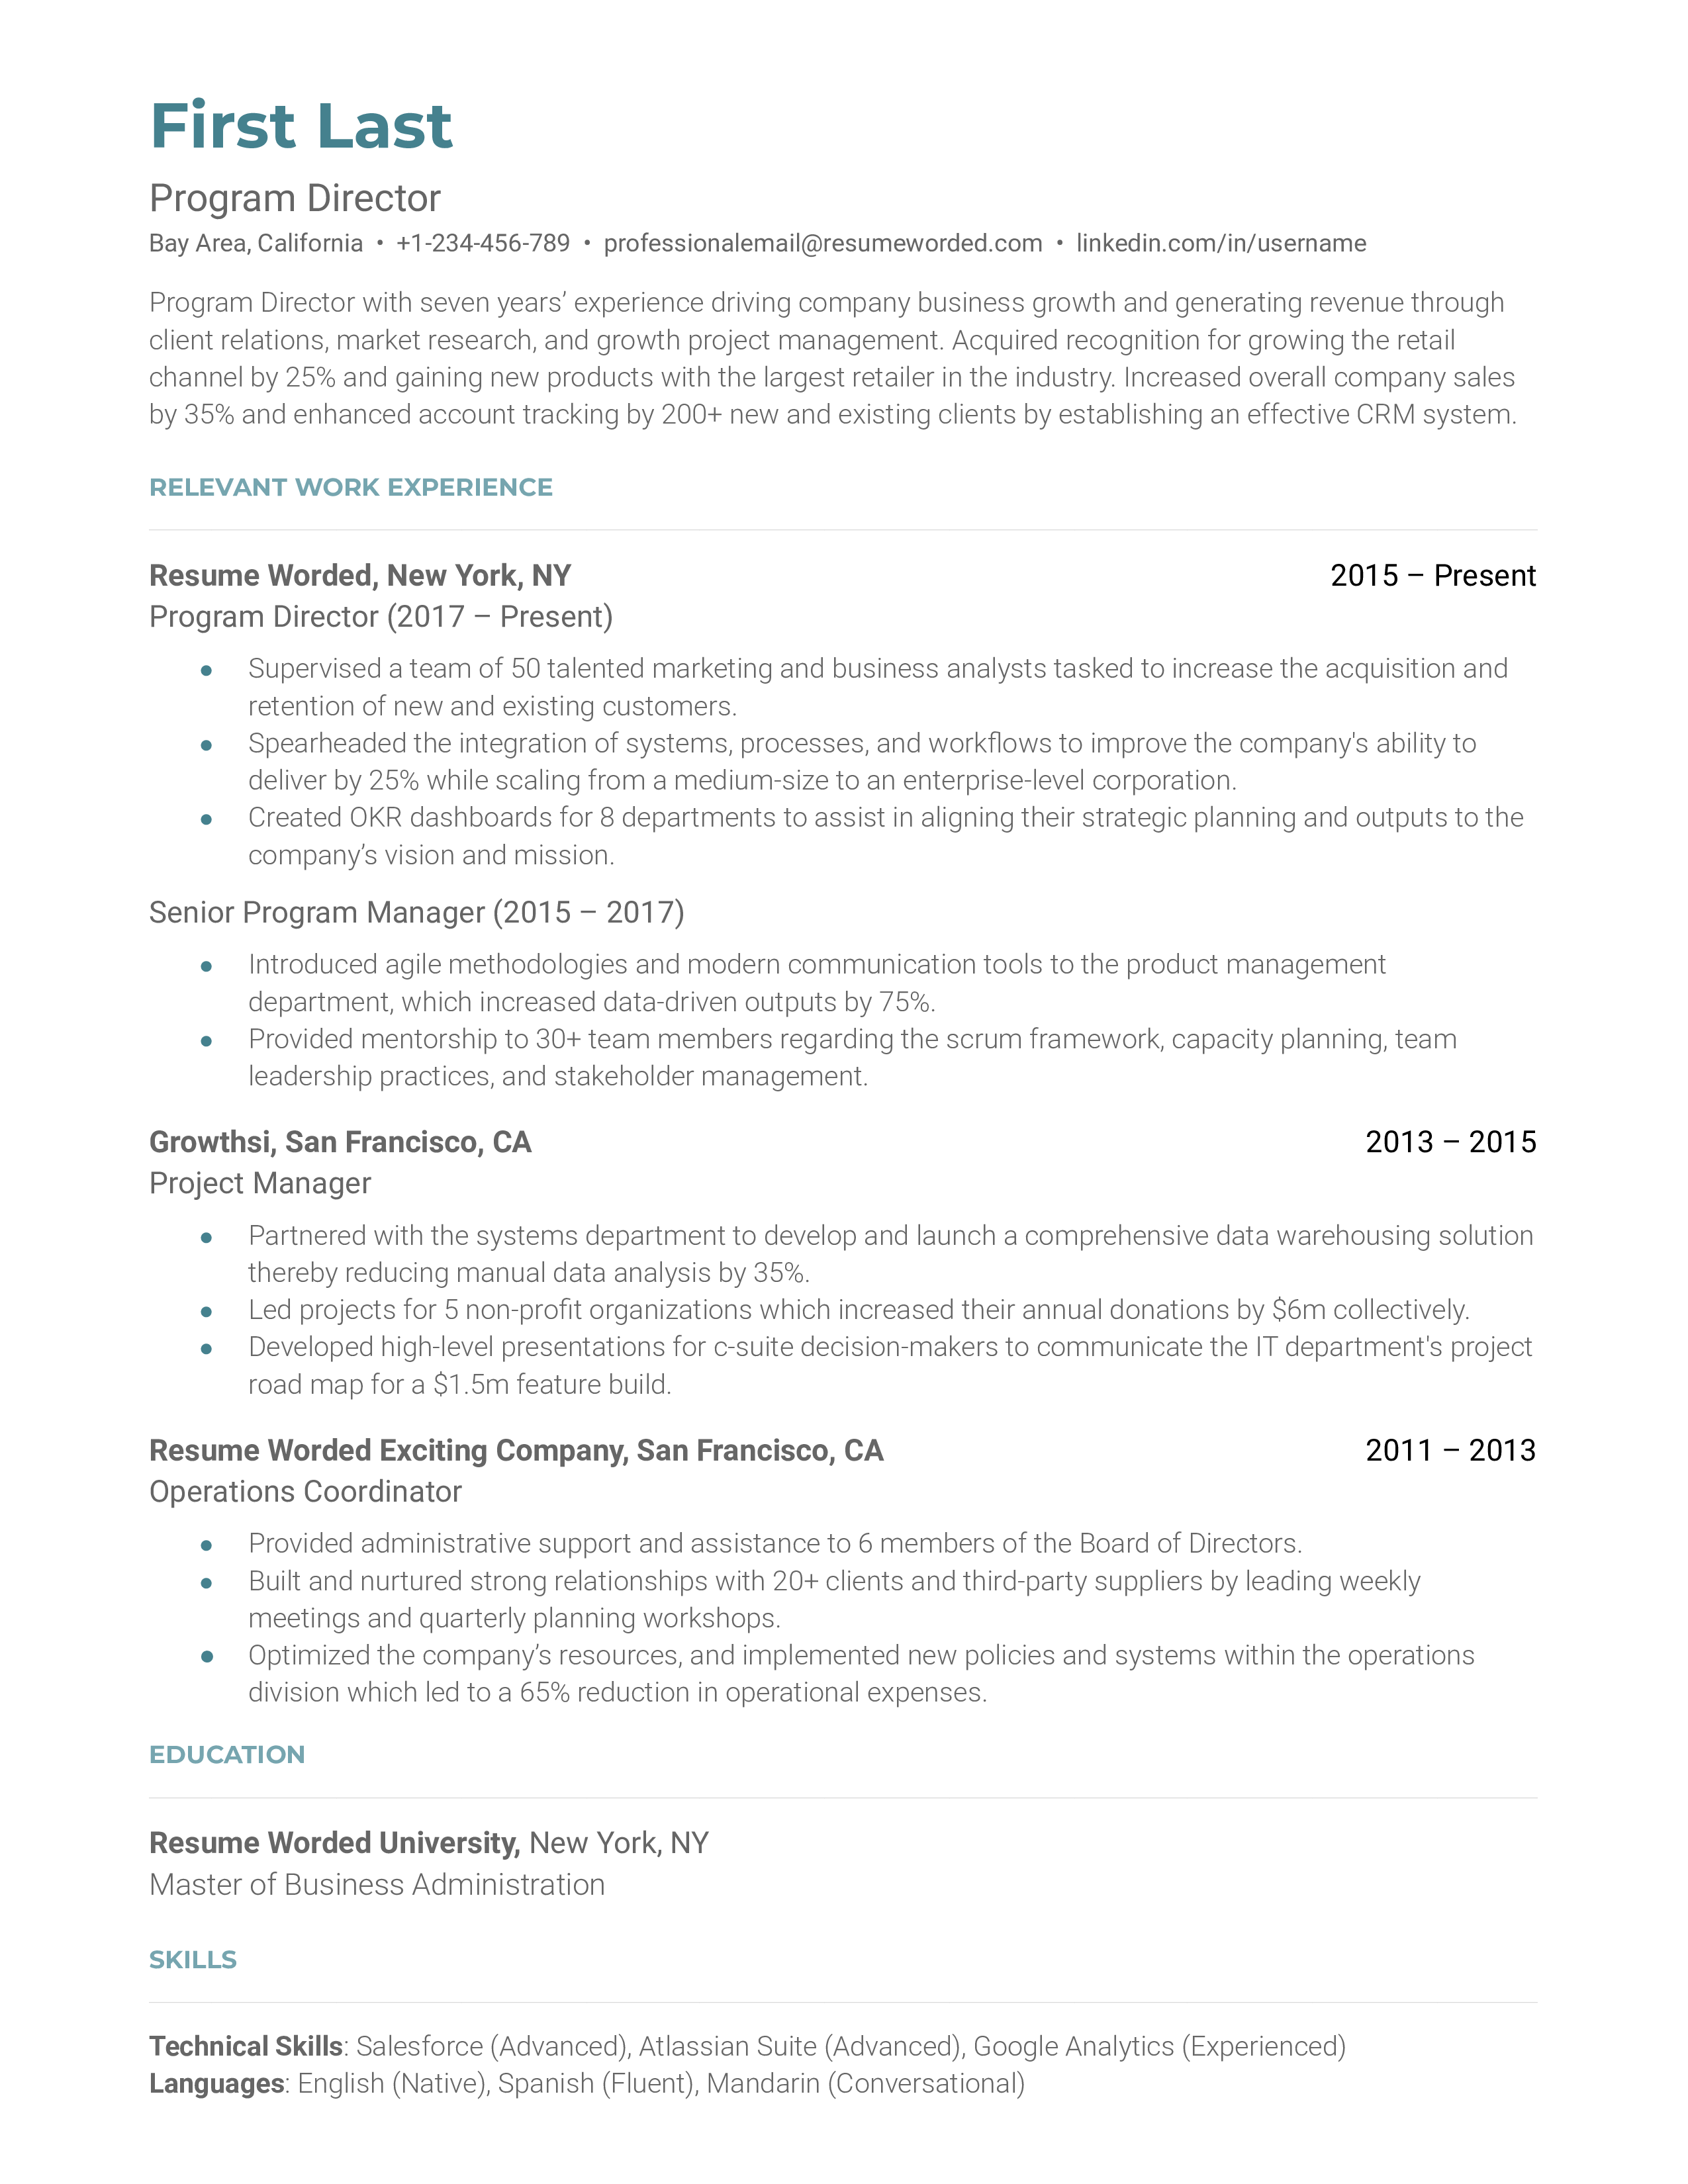 A resume for a program director with a masters degree in business adminstration and experience as a program manager.